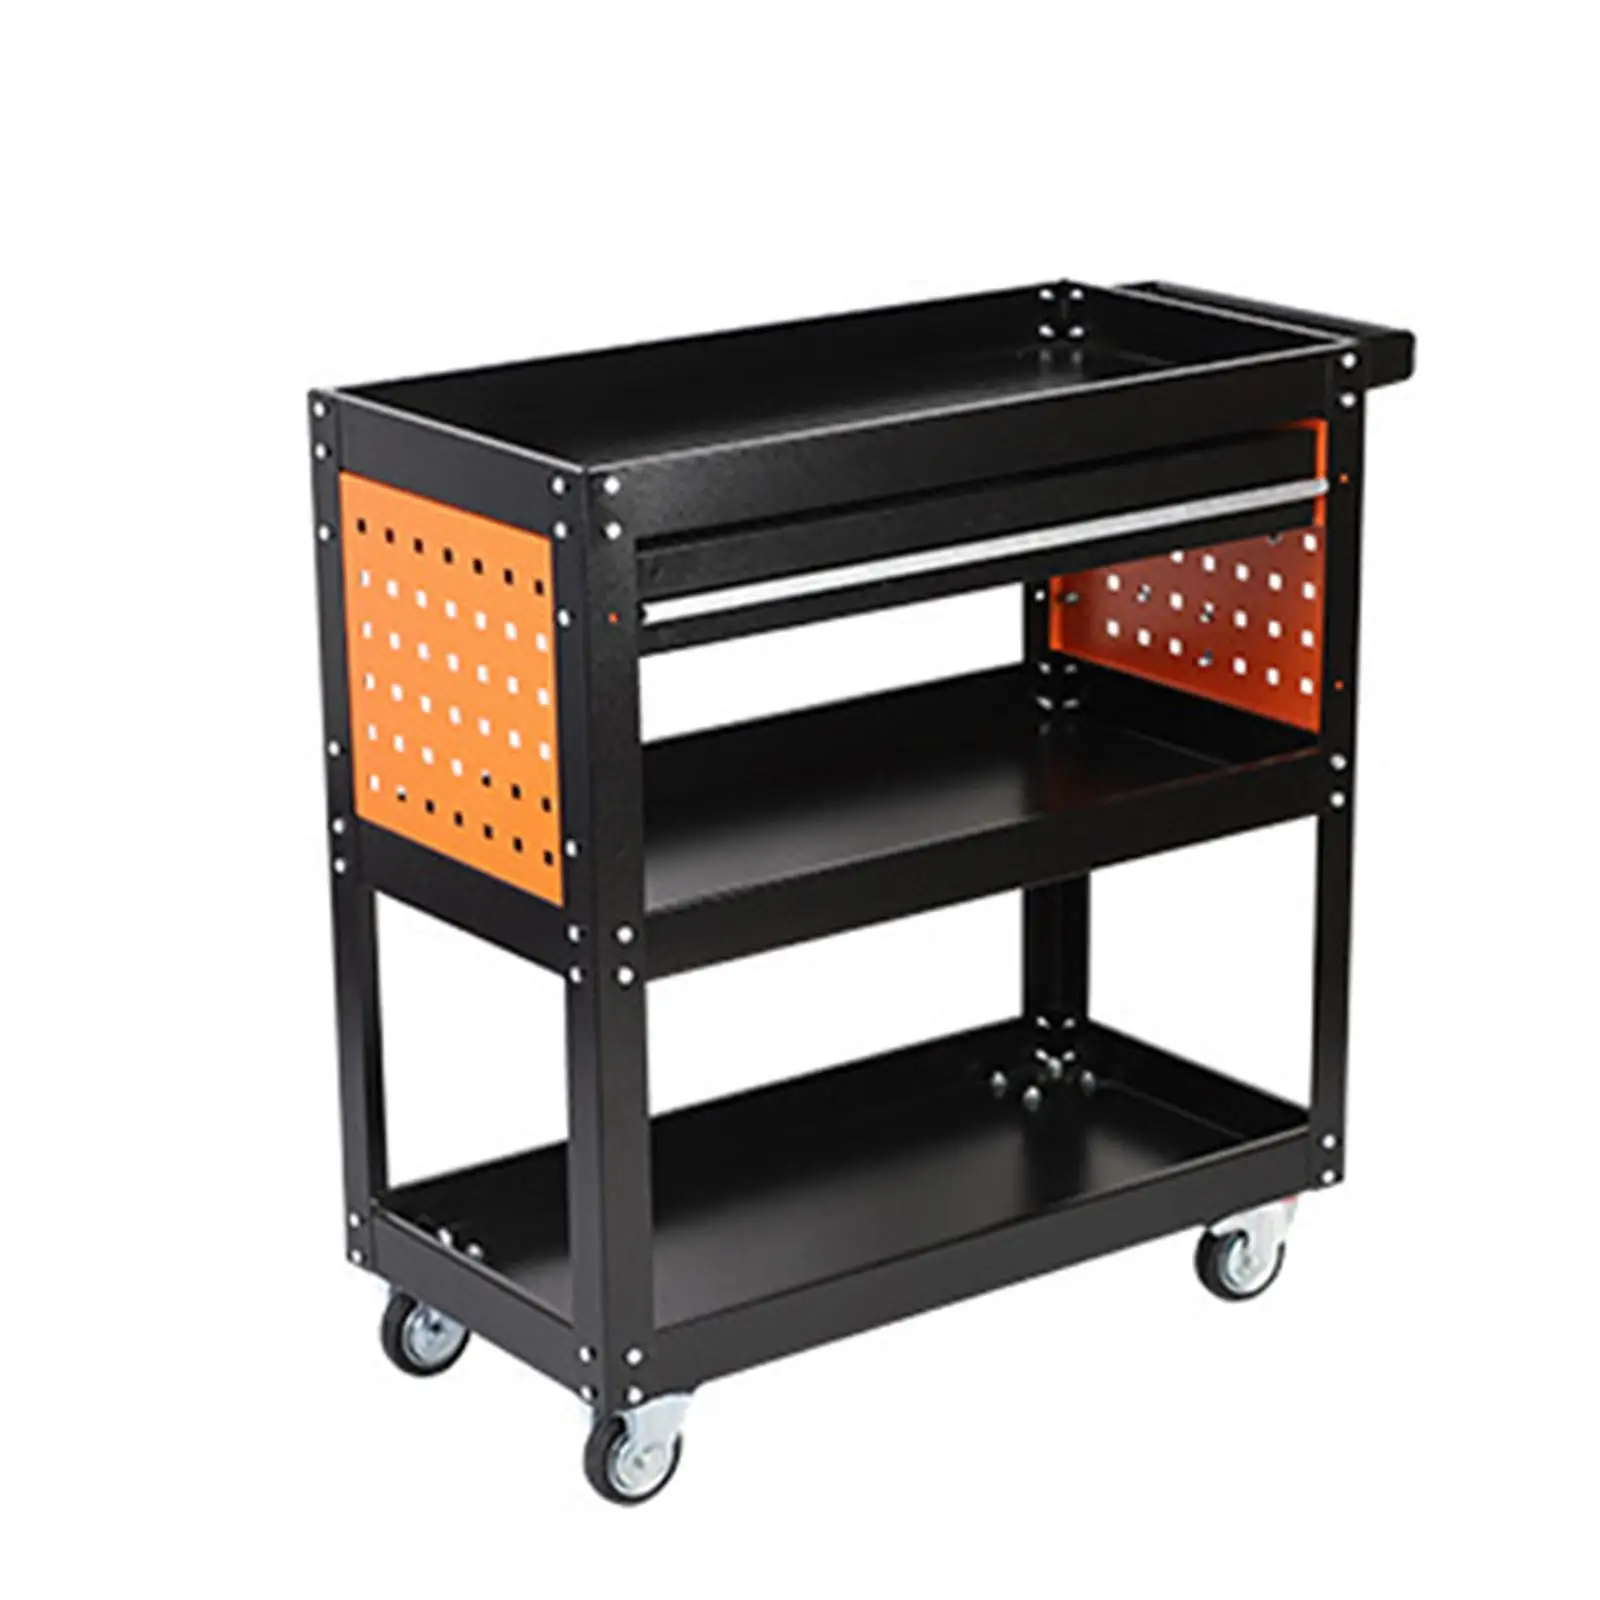 Trolley Tool Cart Heavy Duty Multifunction Organizer with Wheels Service Cart for Garage